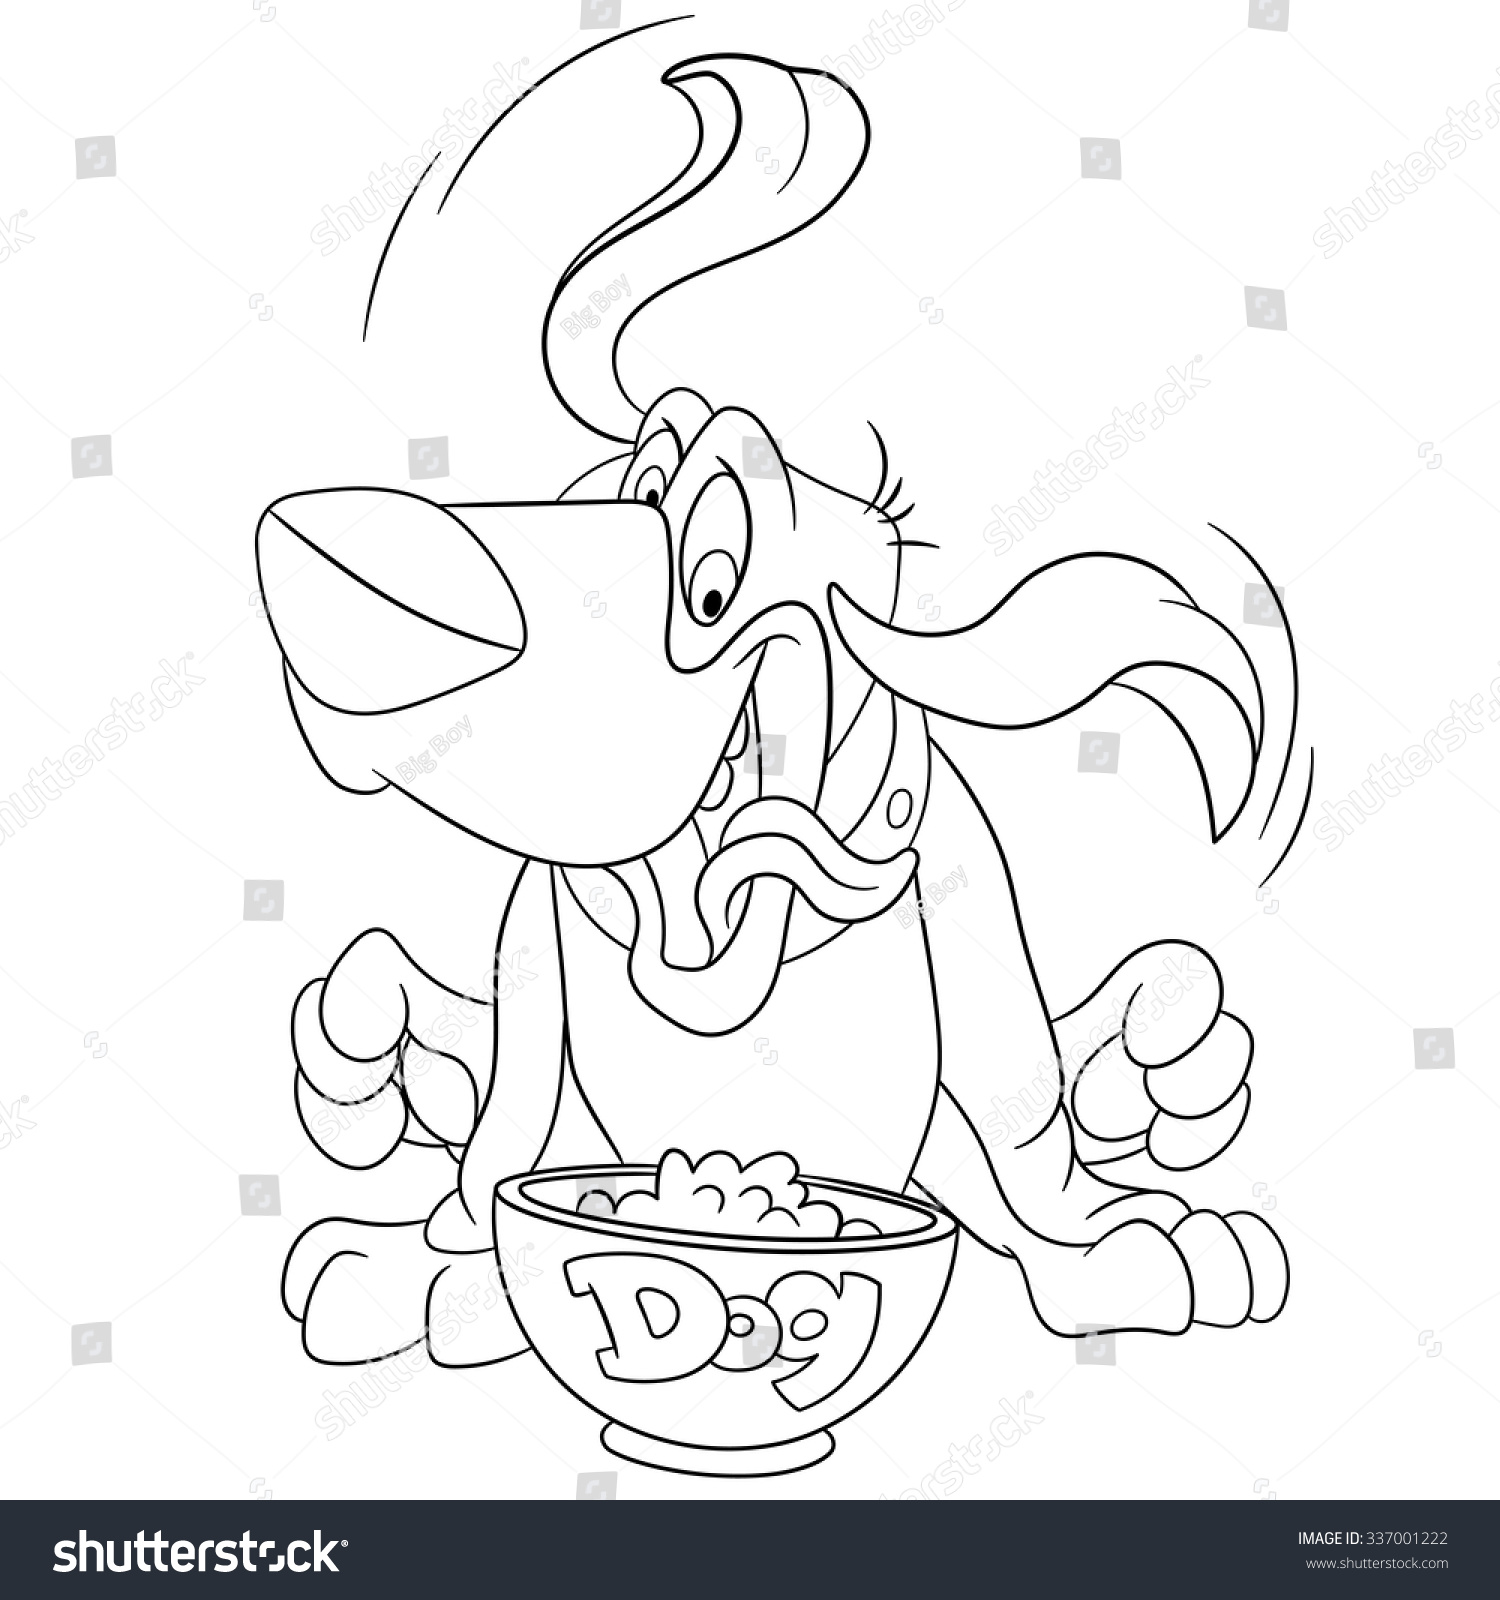 Download Coloring Page Cartoon Basset Hound Dog Stock Vector 337001222 - Shutterstock